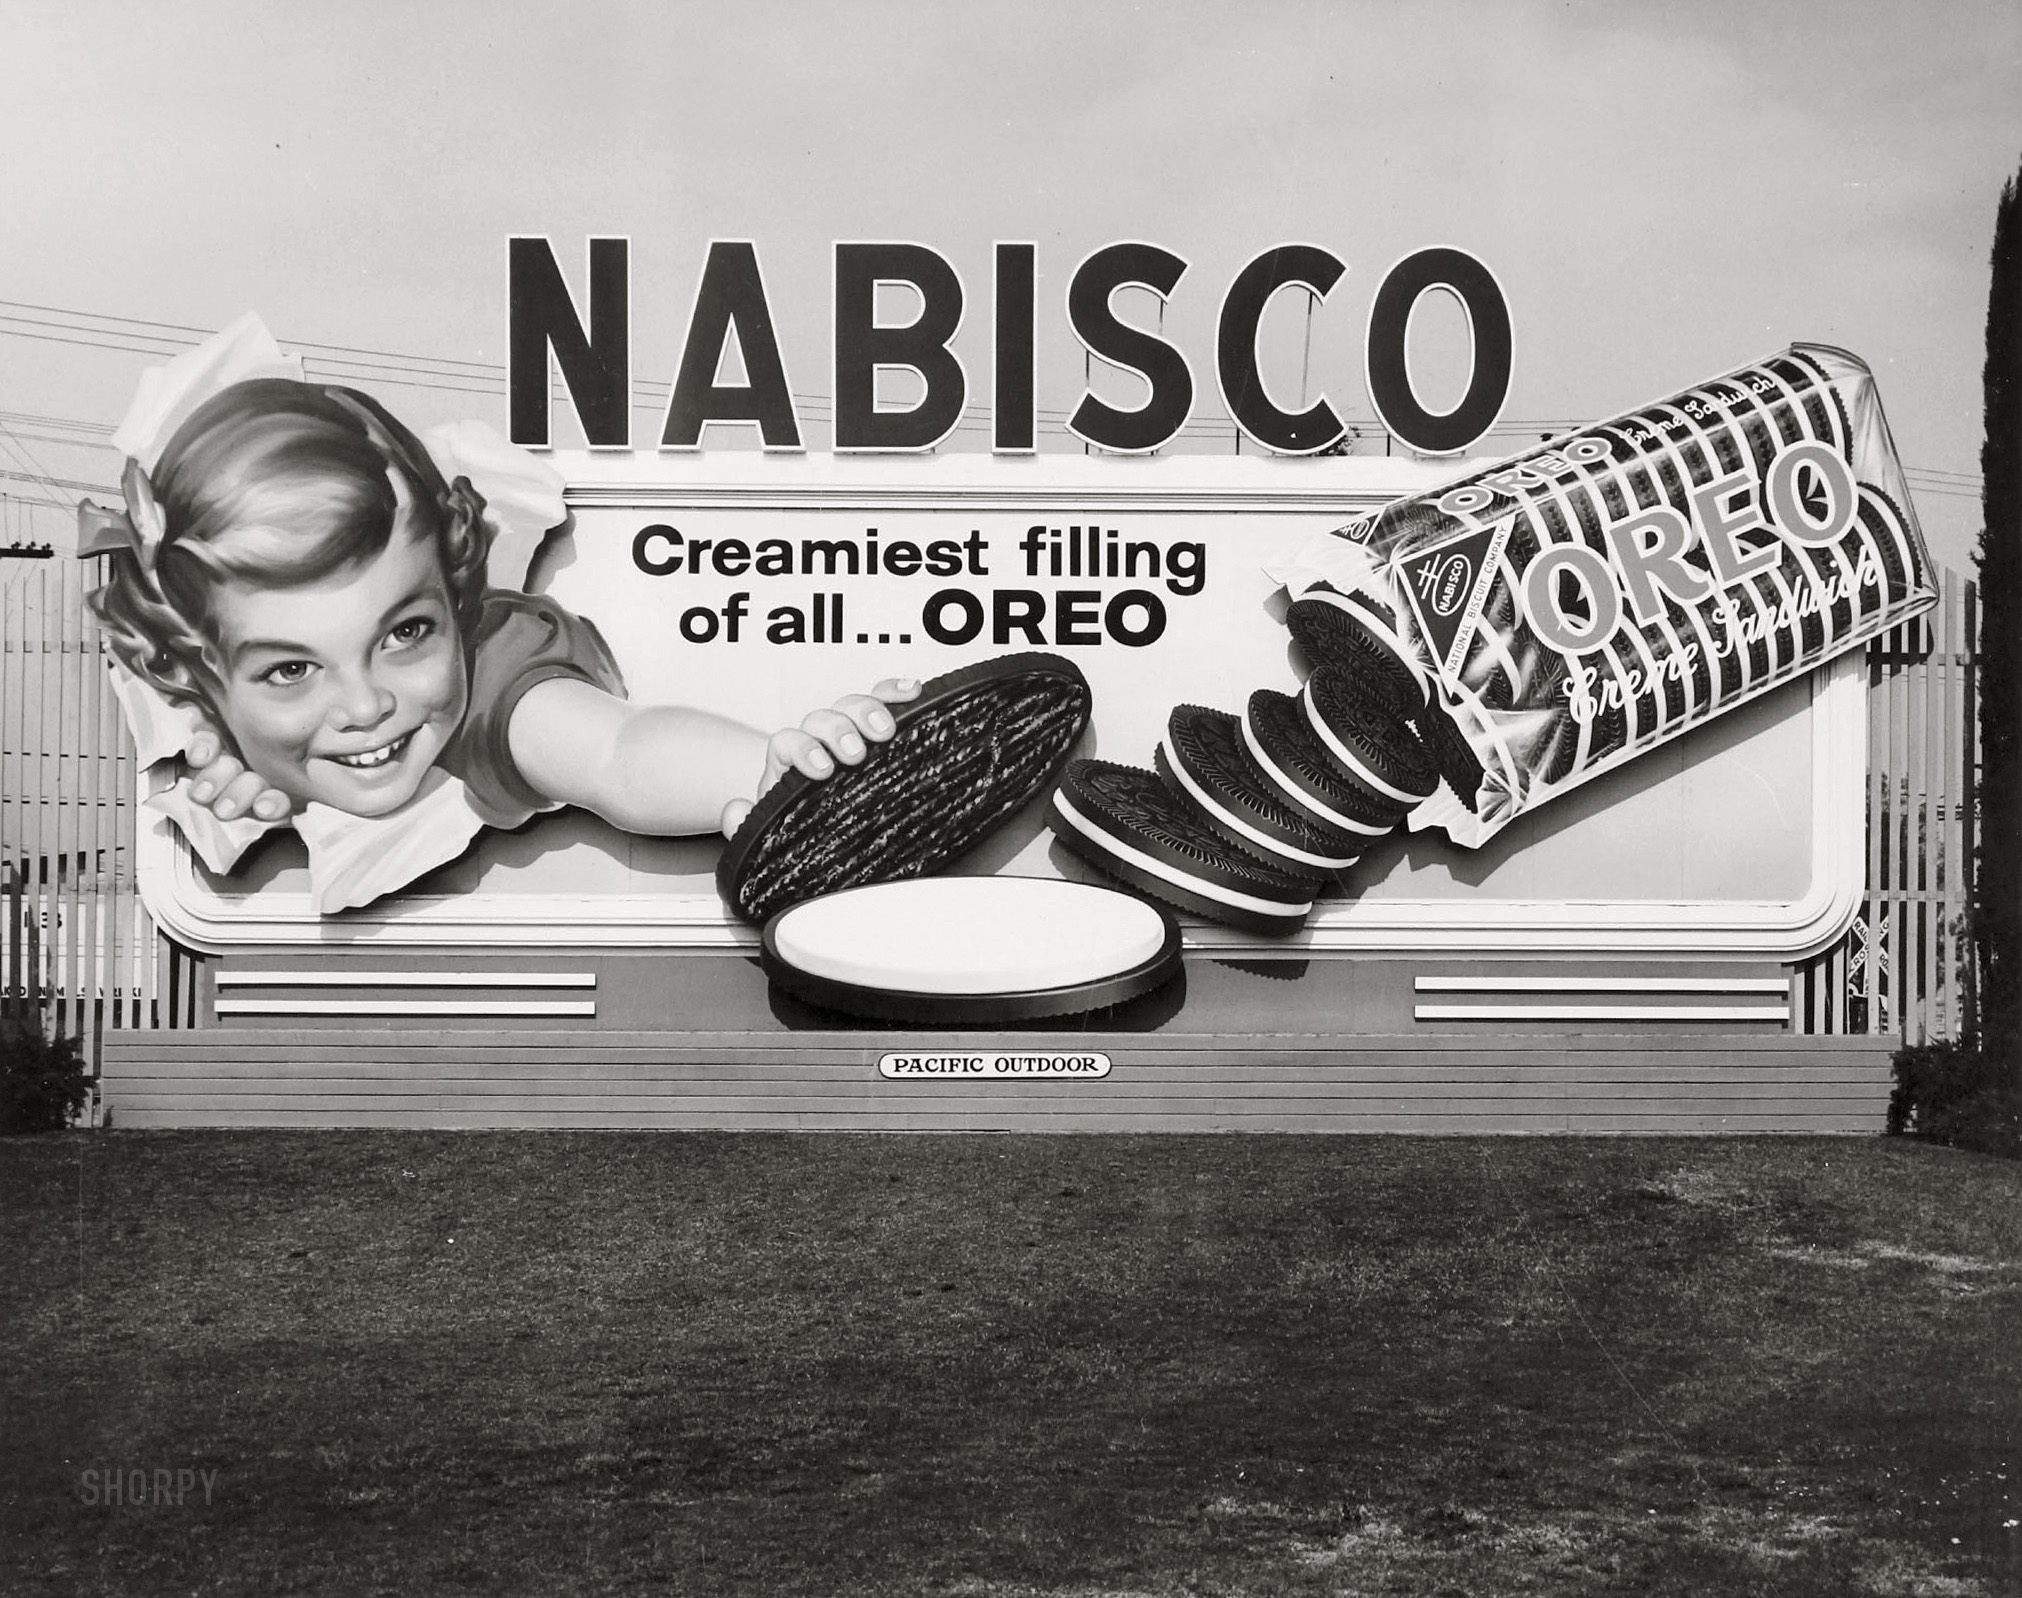 Los Angeles circa 1956. "Creamiest filling of all ... OREO Creme Sandwich." No. 5 in a series of billboard photos from the files of Pacific Outdoor Advertising. View full size.